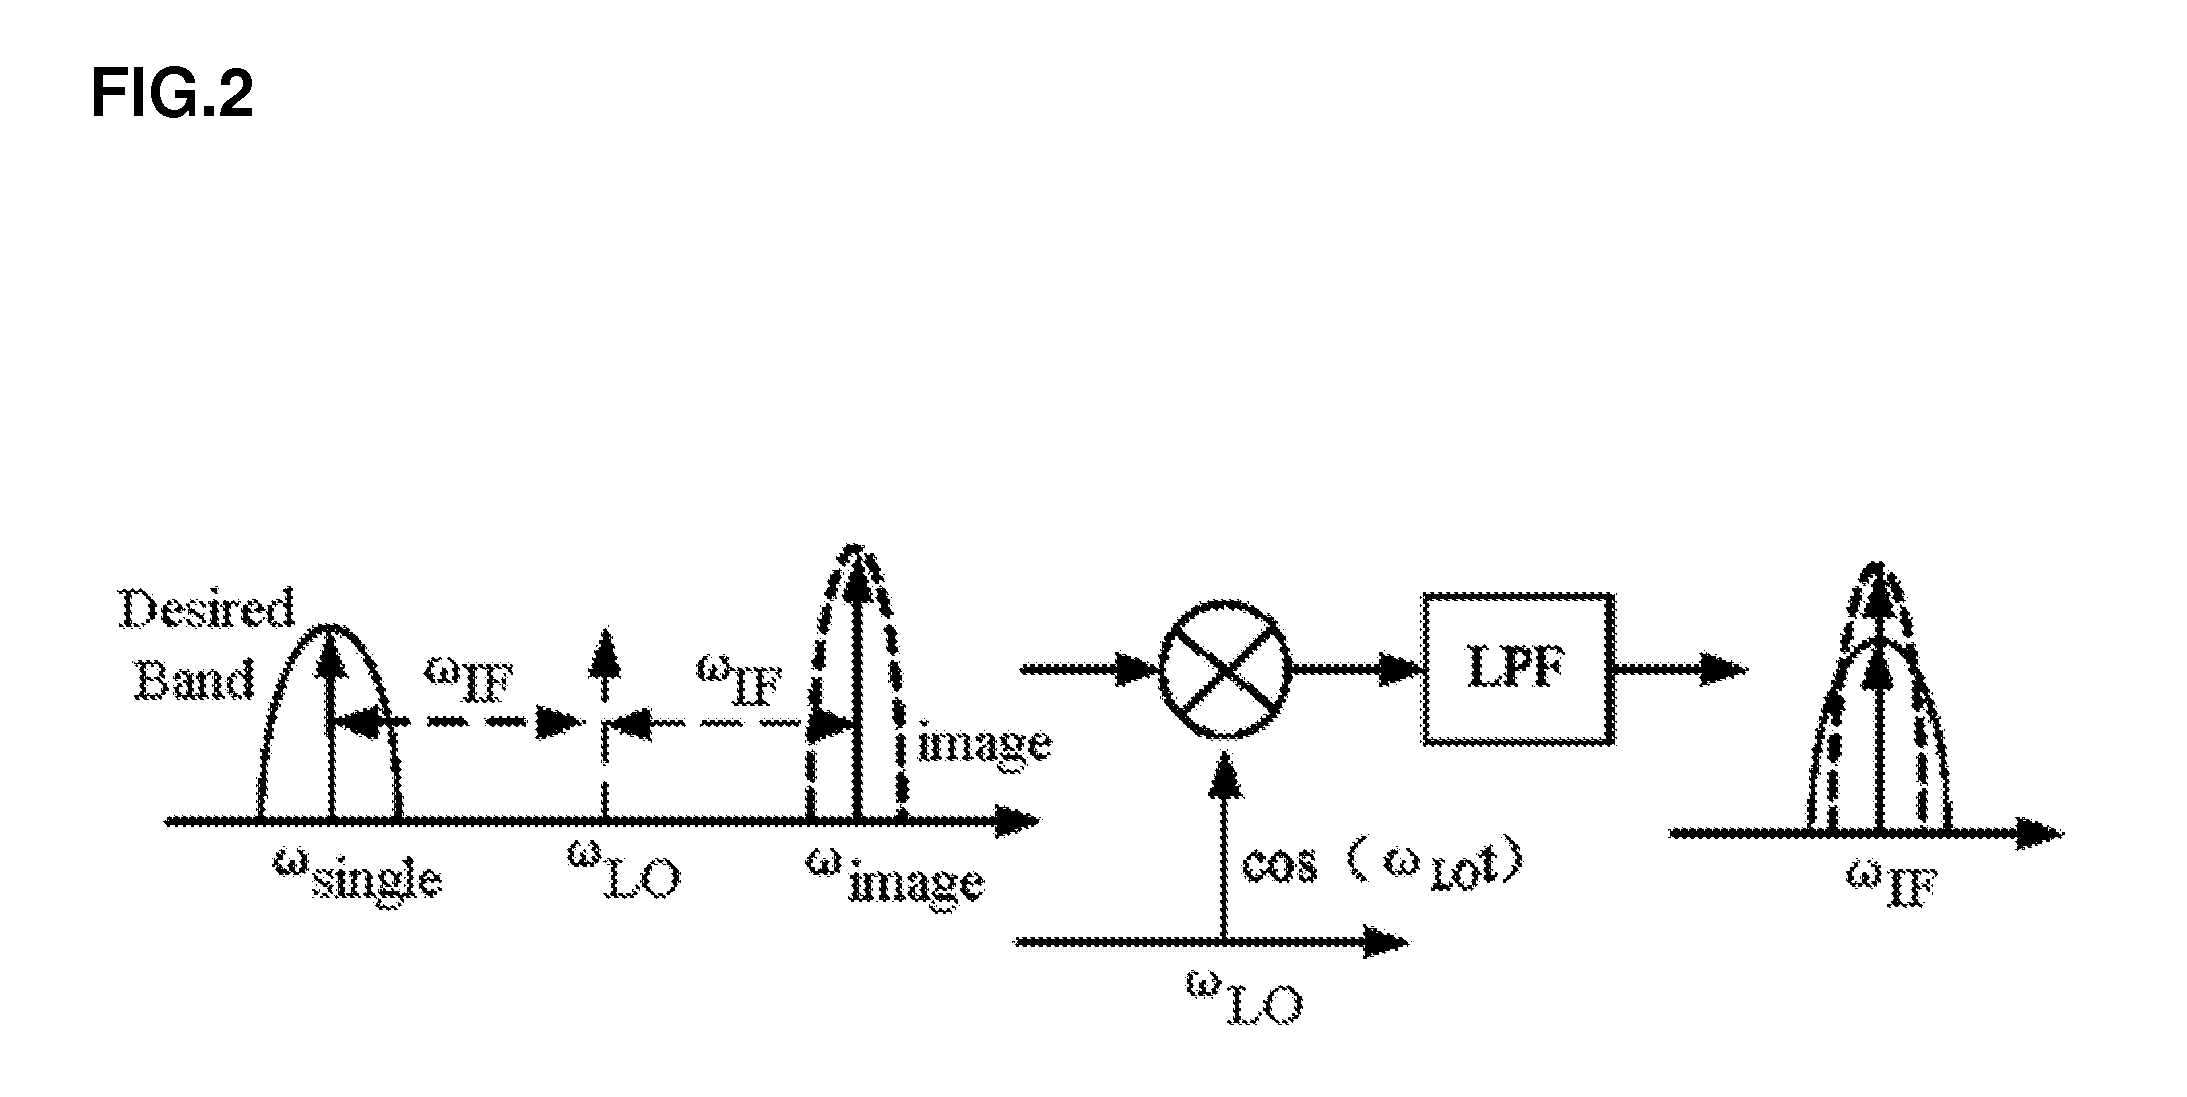 Radio frequency front-end based on high-intermediate frequency superheterodyne and zero intermediate frequency structure